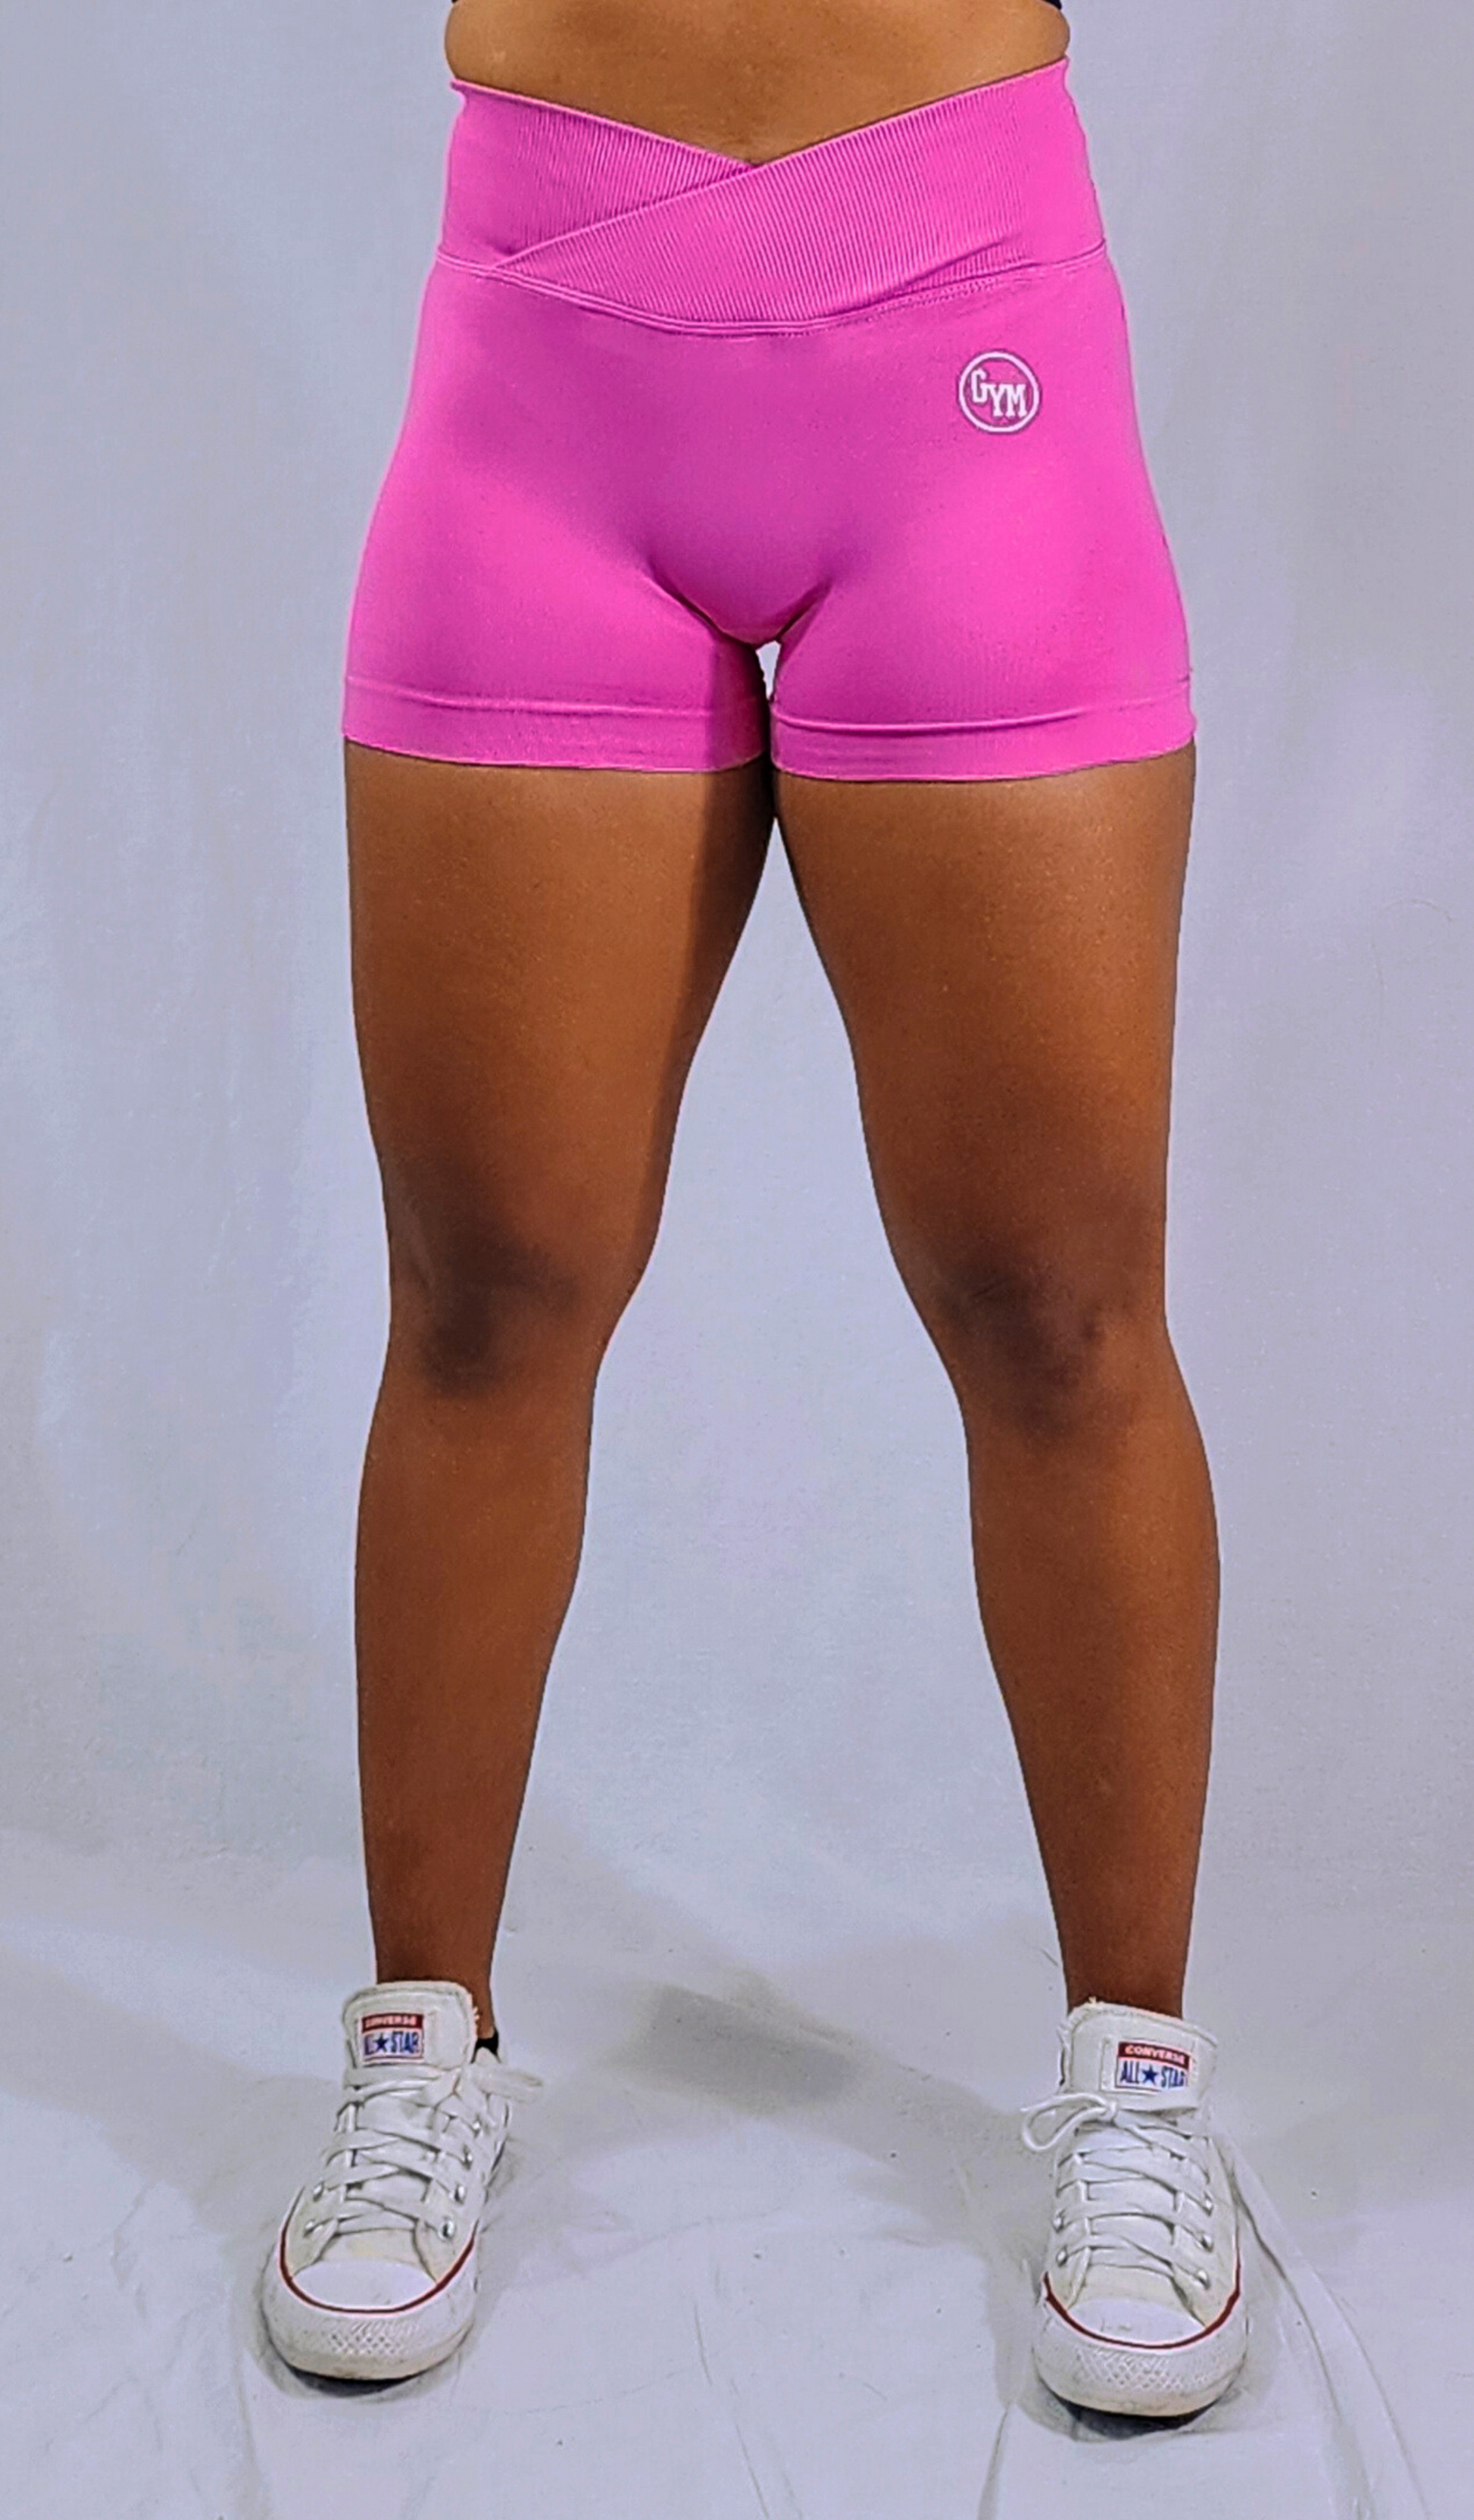 Gym Brand Apparel pink shorts front view.